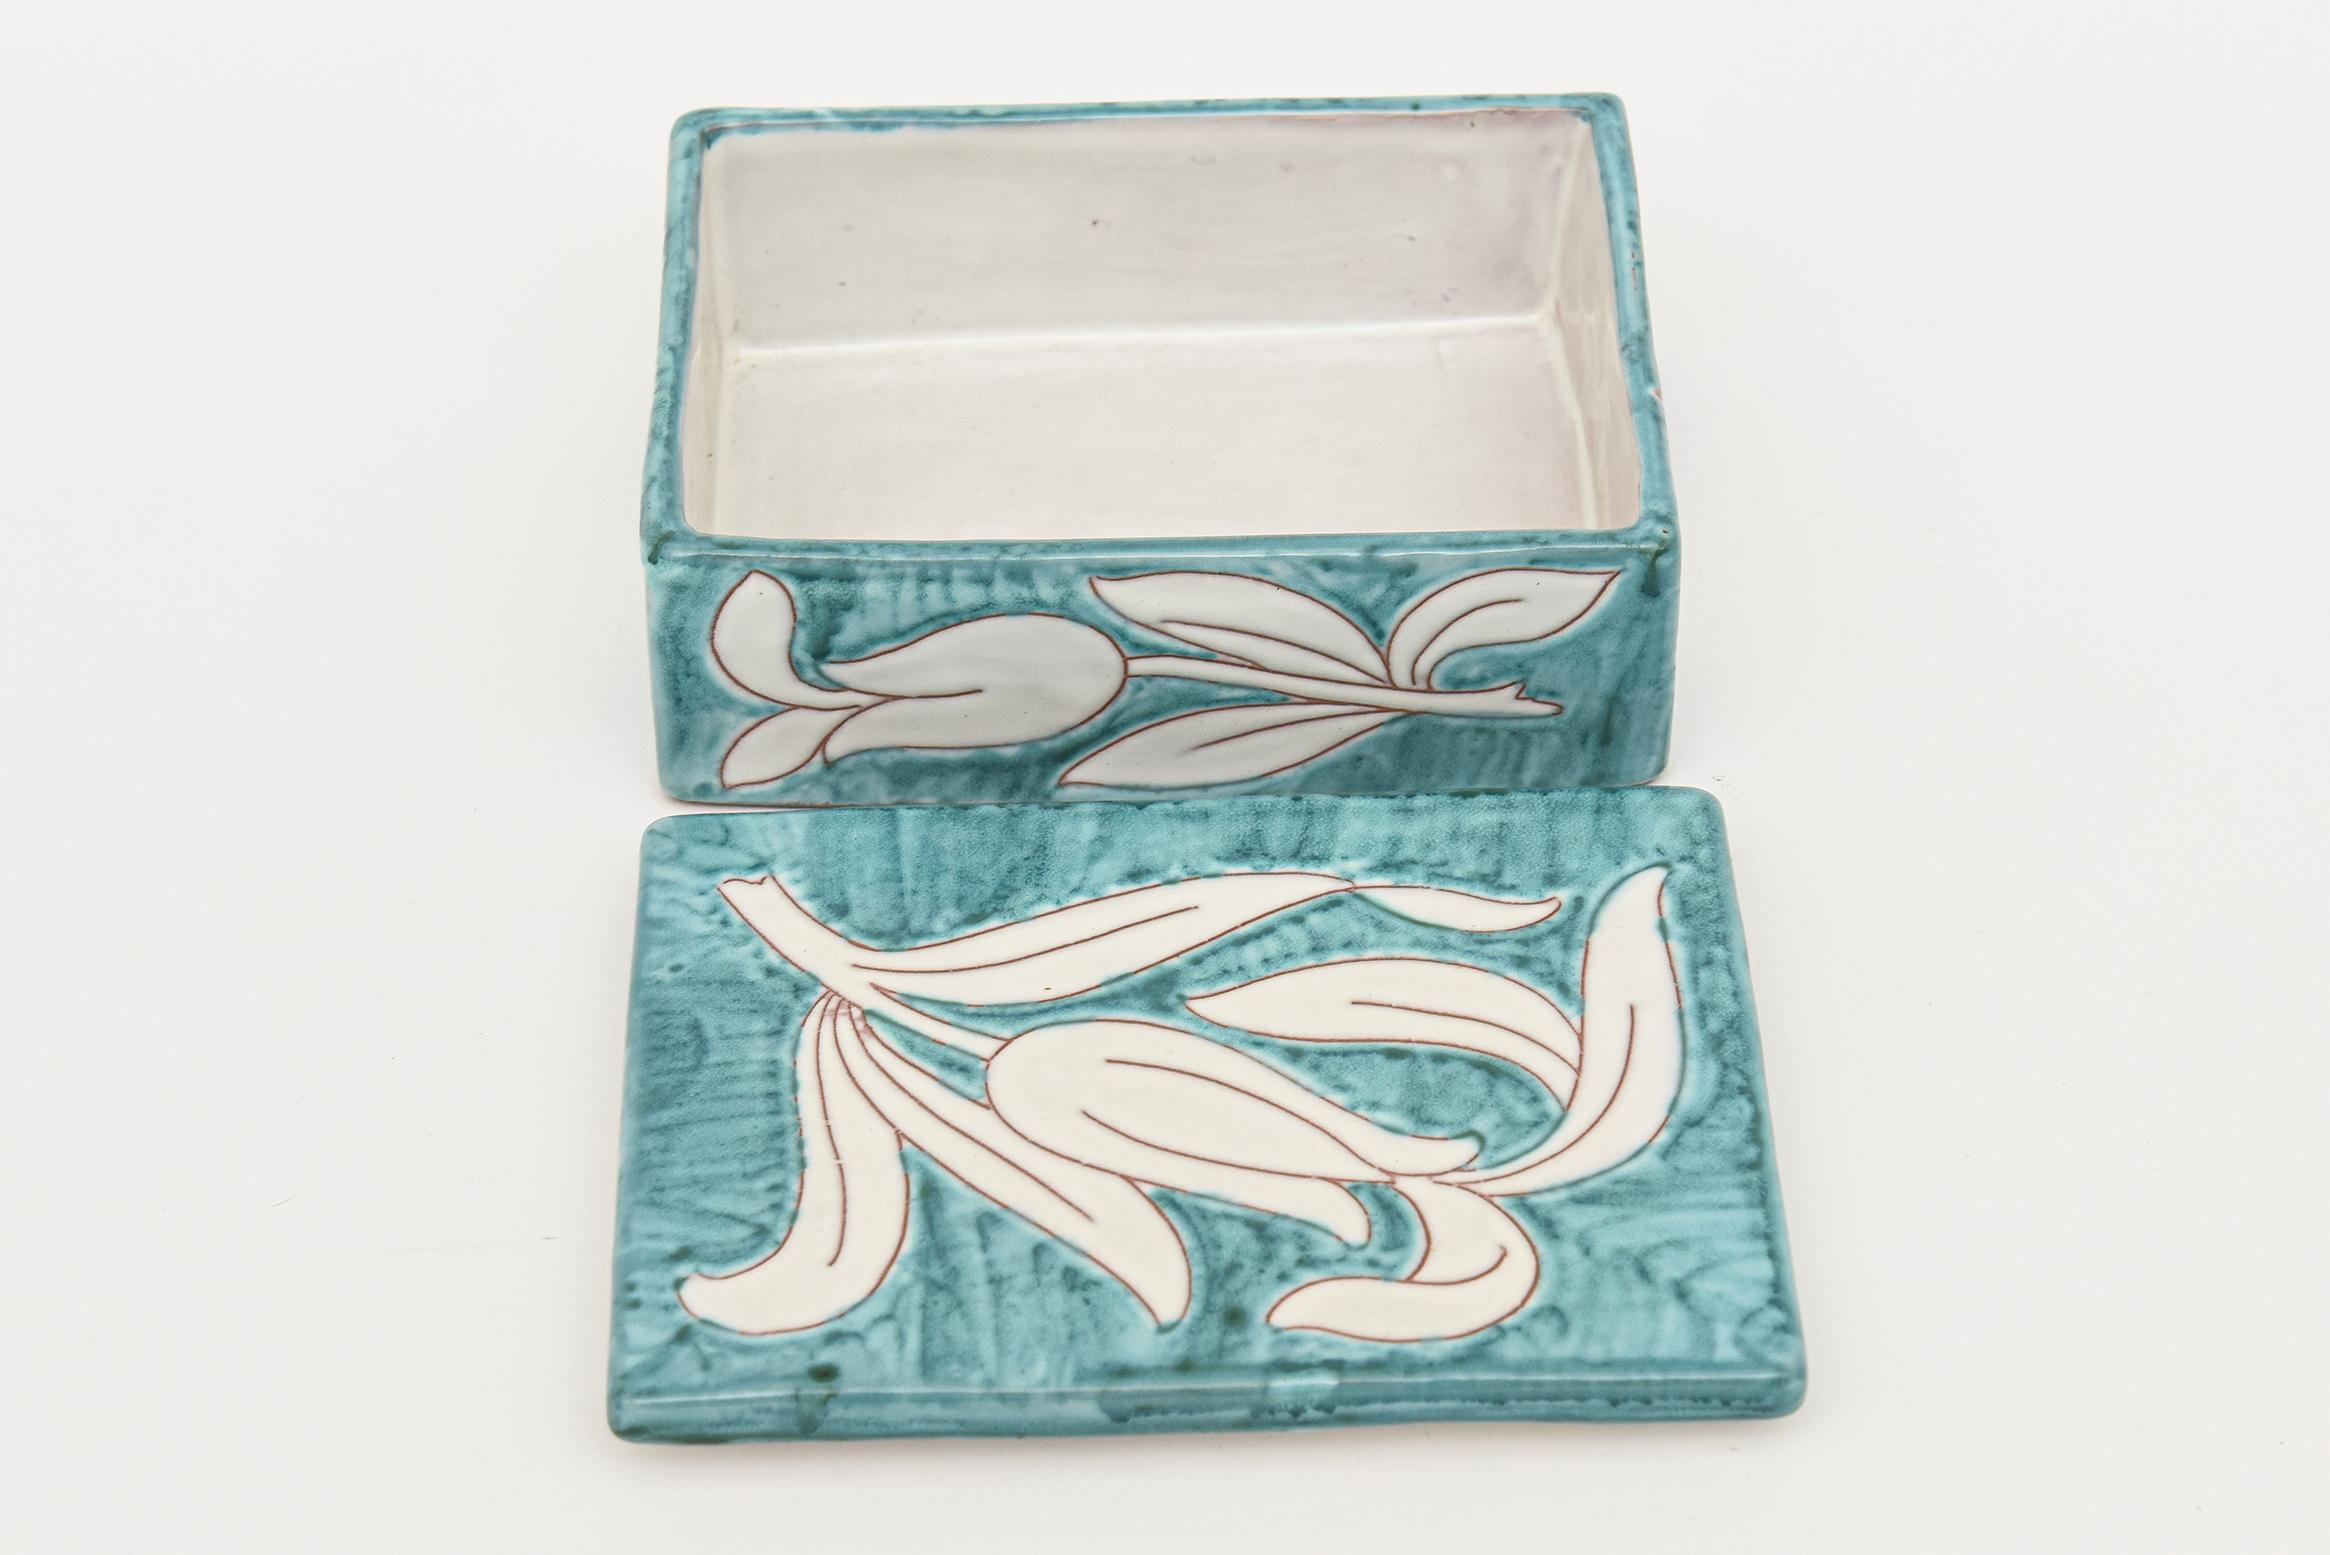 Mid-20th Century Vintage Italian Raymor Ceramic Lidded Flower Box Turquoise and White For Sale